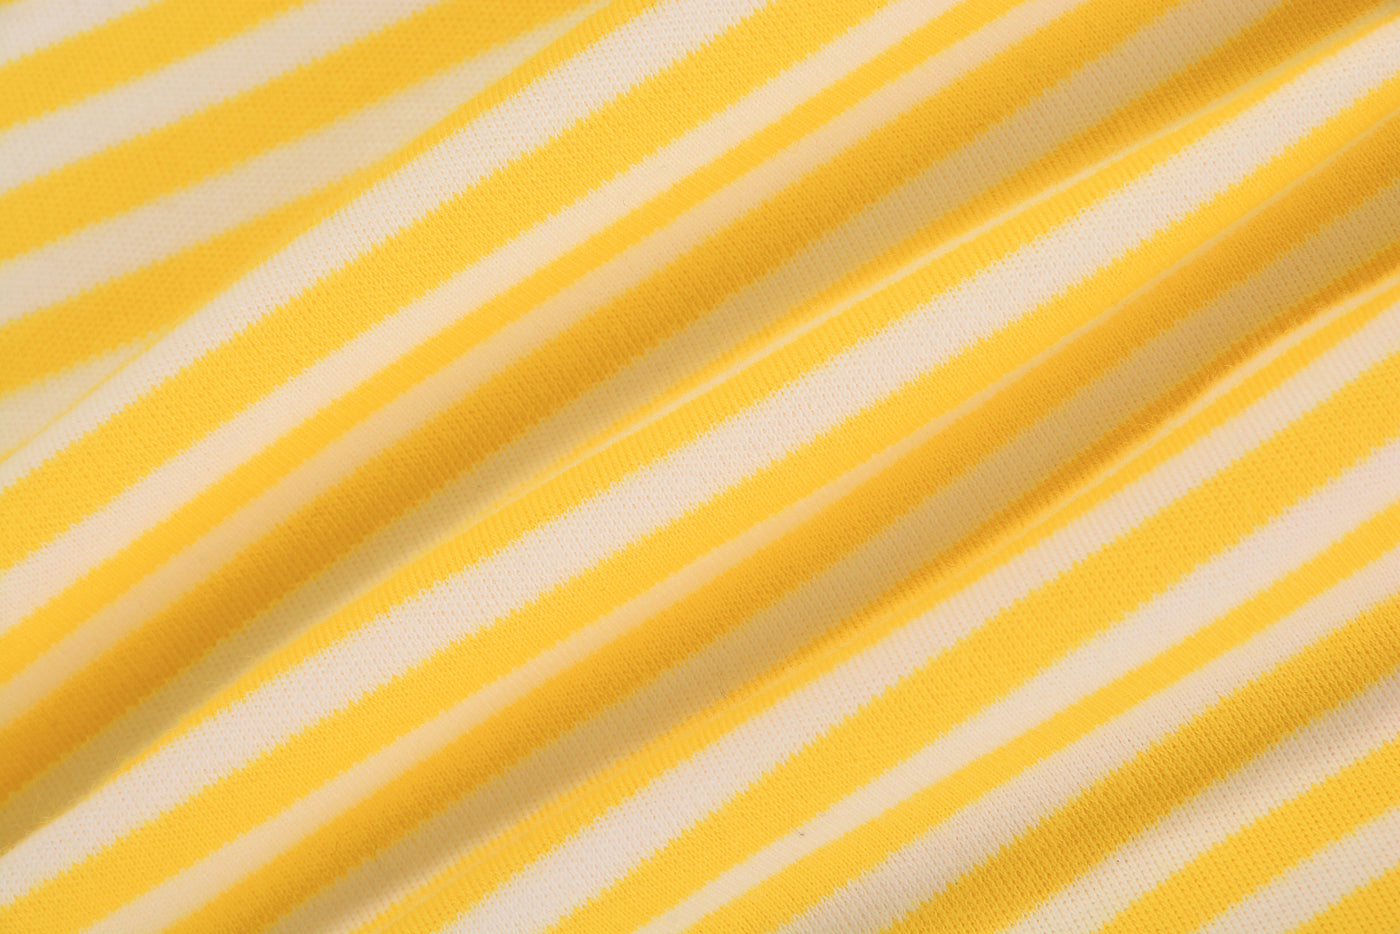 Baby Yellow Stripes Bee Jumpsuit All In One - Little Kooma